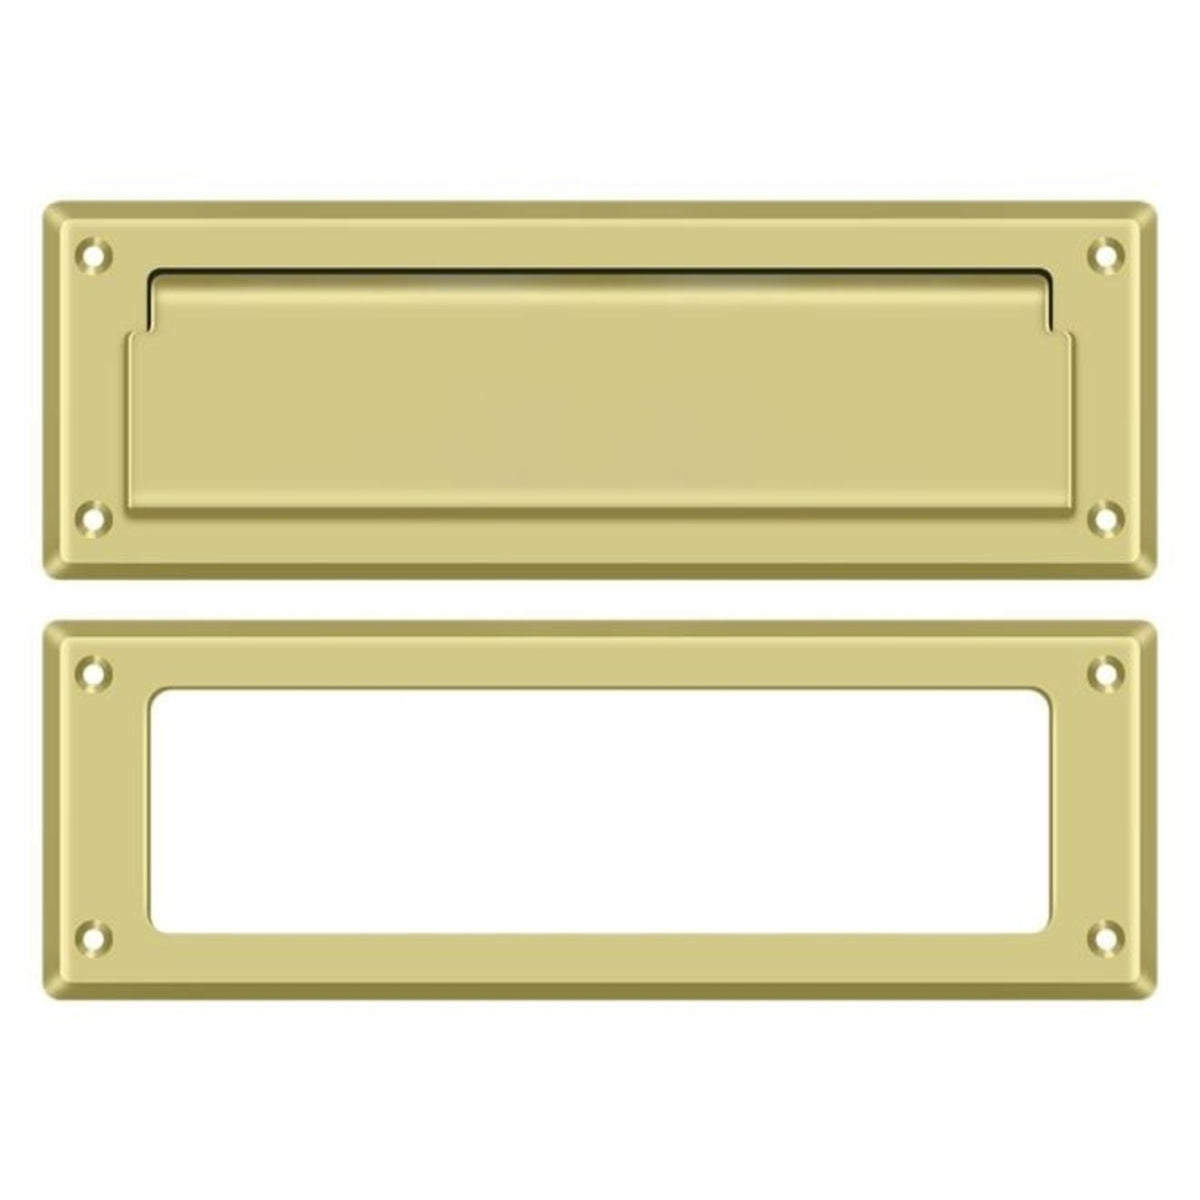 Deltana MS626U3 Mail Slot With Interior Frame, Bright Brass